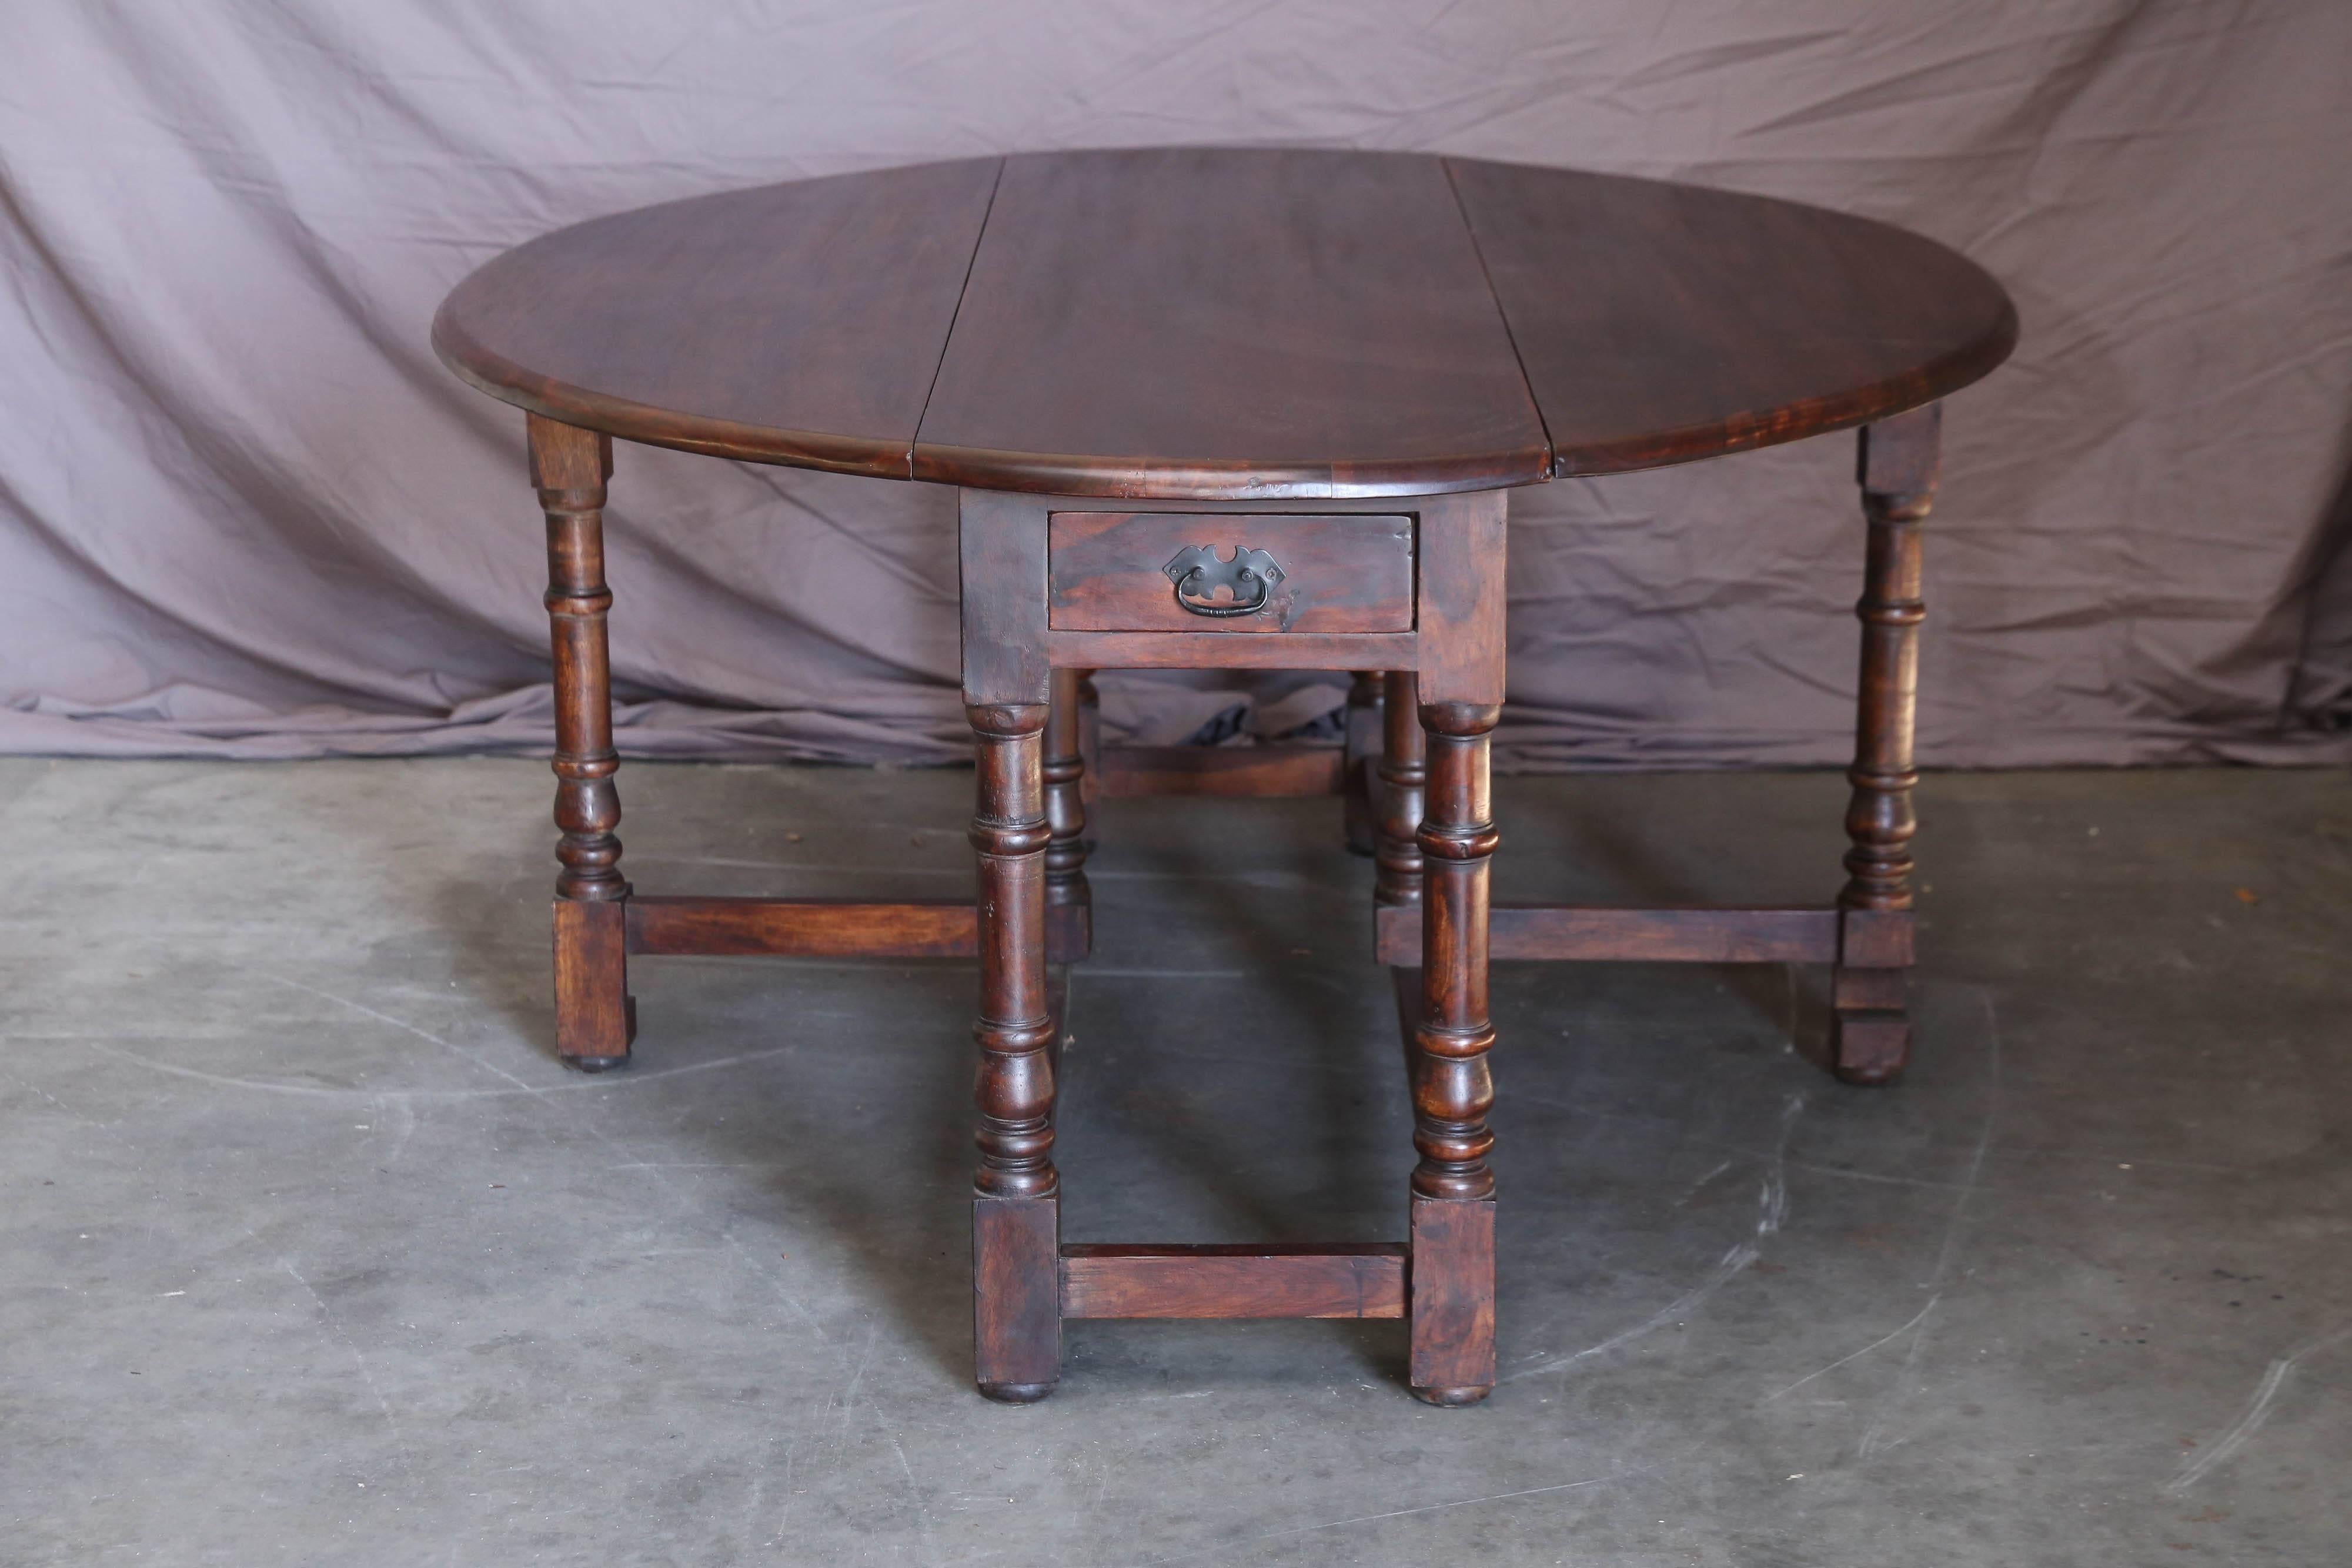 Hand-Crafted 1920s Solid Teak Wood British Colonial Gate Leg Breakfast Table For Sale